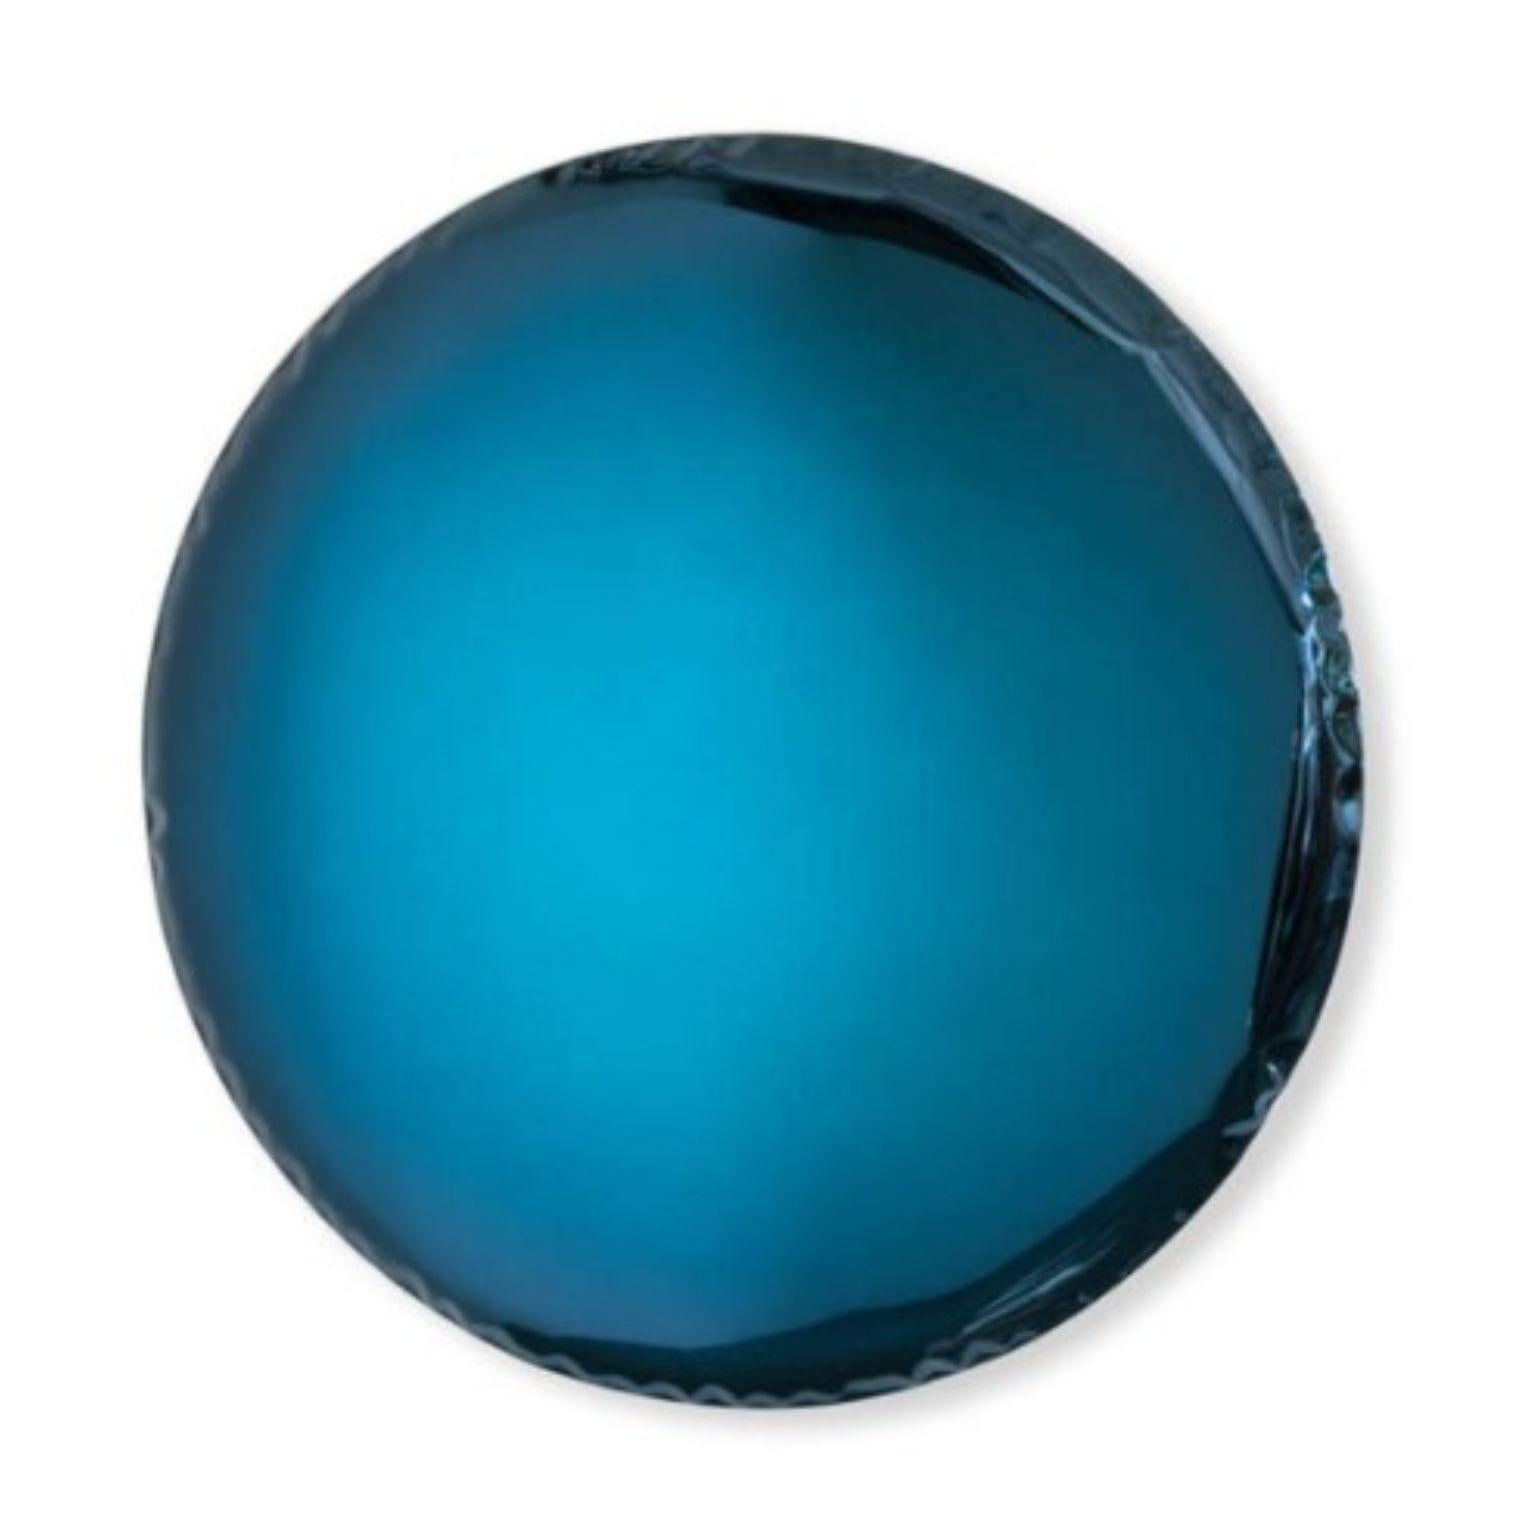 Deep Space Blue Oko 62 sculptural wall mirror by Zieta
Dimensions: Diameter 62 x D 6 cm 
Material: Stainless steel. 
Finish: Deep Space Blue.
Available in finishes: Stainless Steel, Deep Space Blue, Emerald, Sapphire, Sapphire/Emerald, Dark Matter,